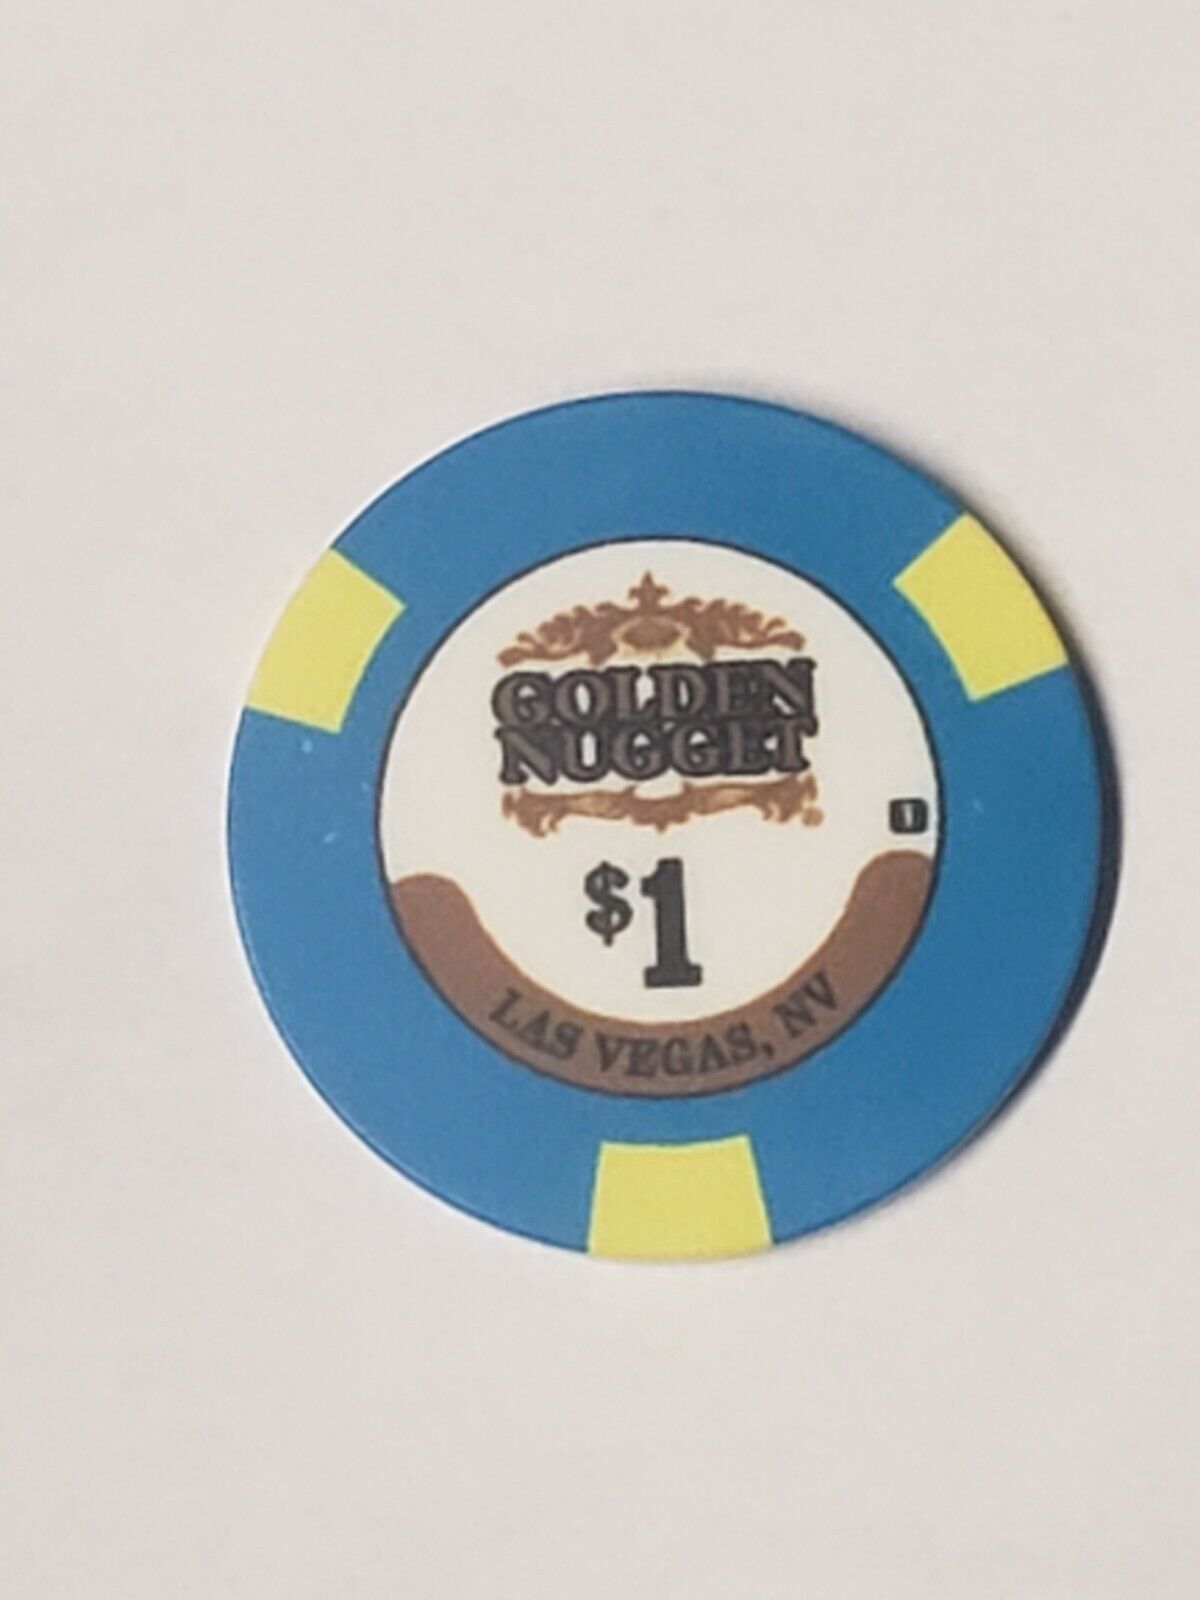 1.00 Chip from the Golden Nugget Casino Las Vegas Nevada 